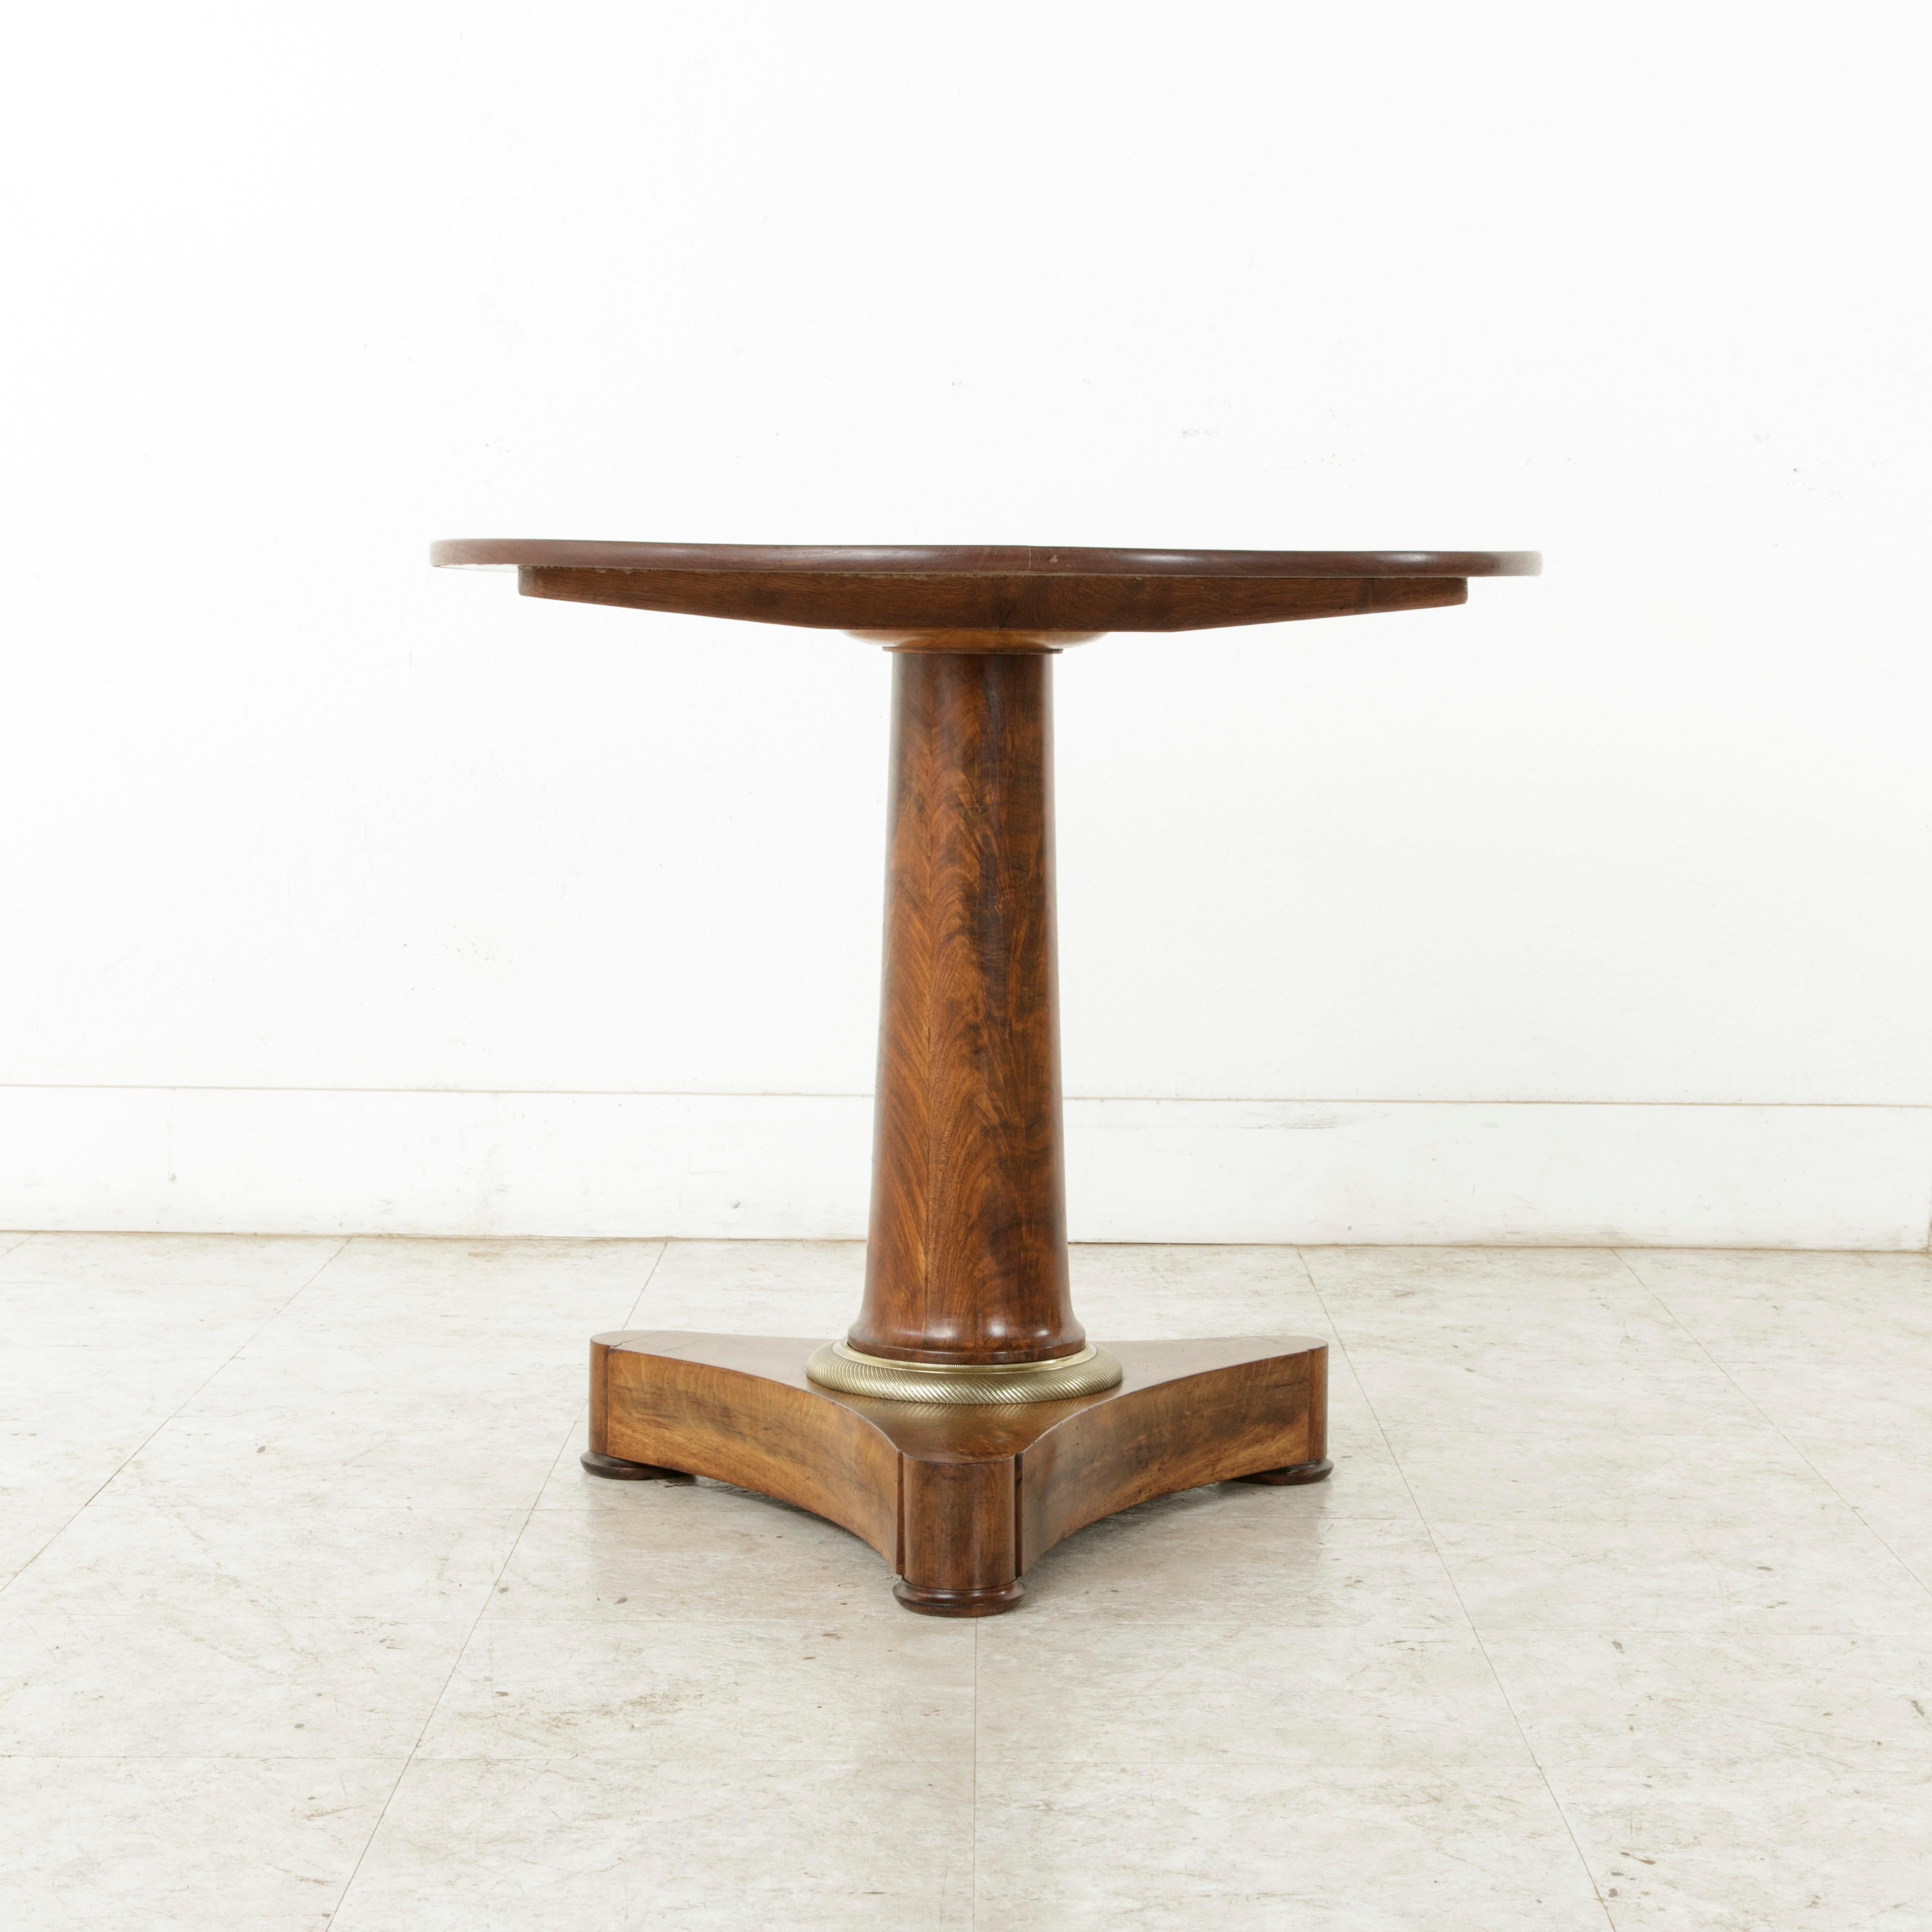 19th Century French Empire Period Mahogany Gueridon, Pedestal Table, Side Table 3